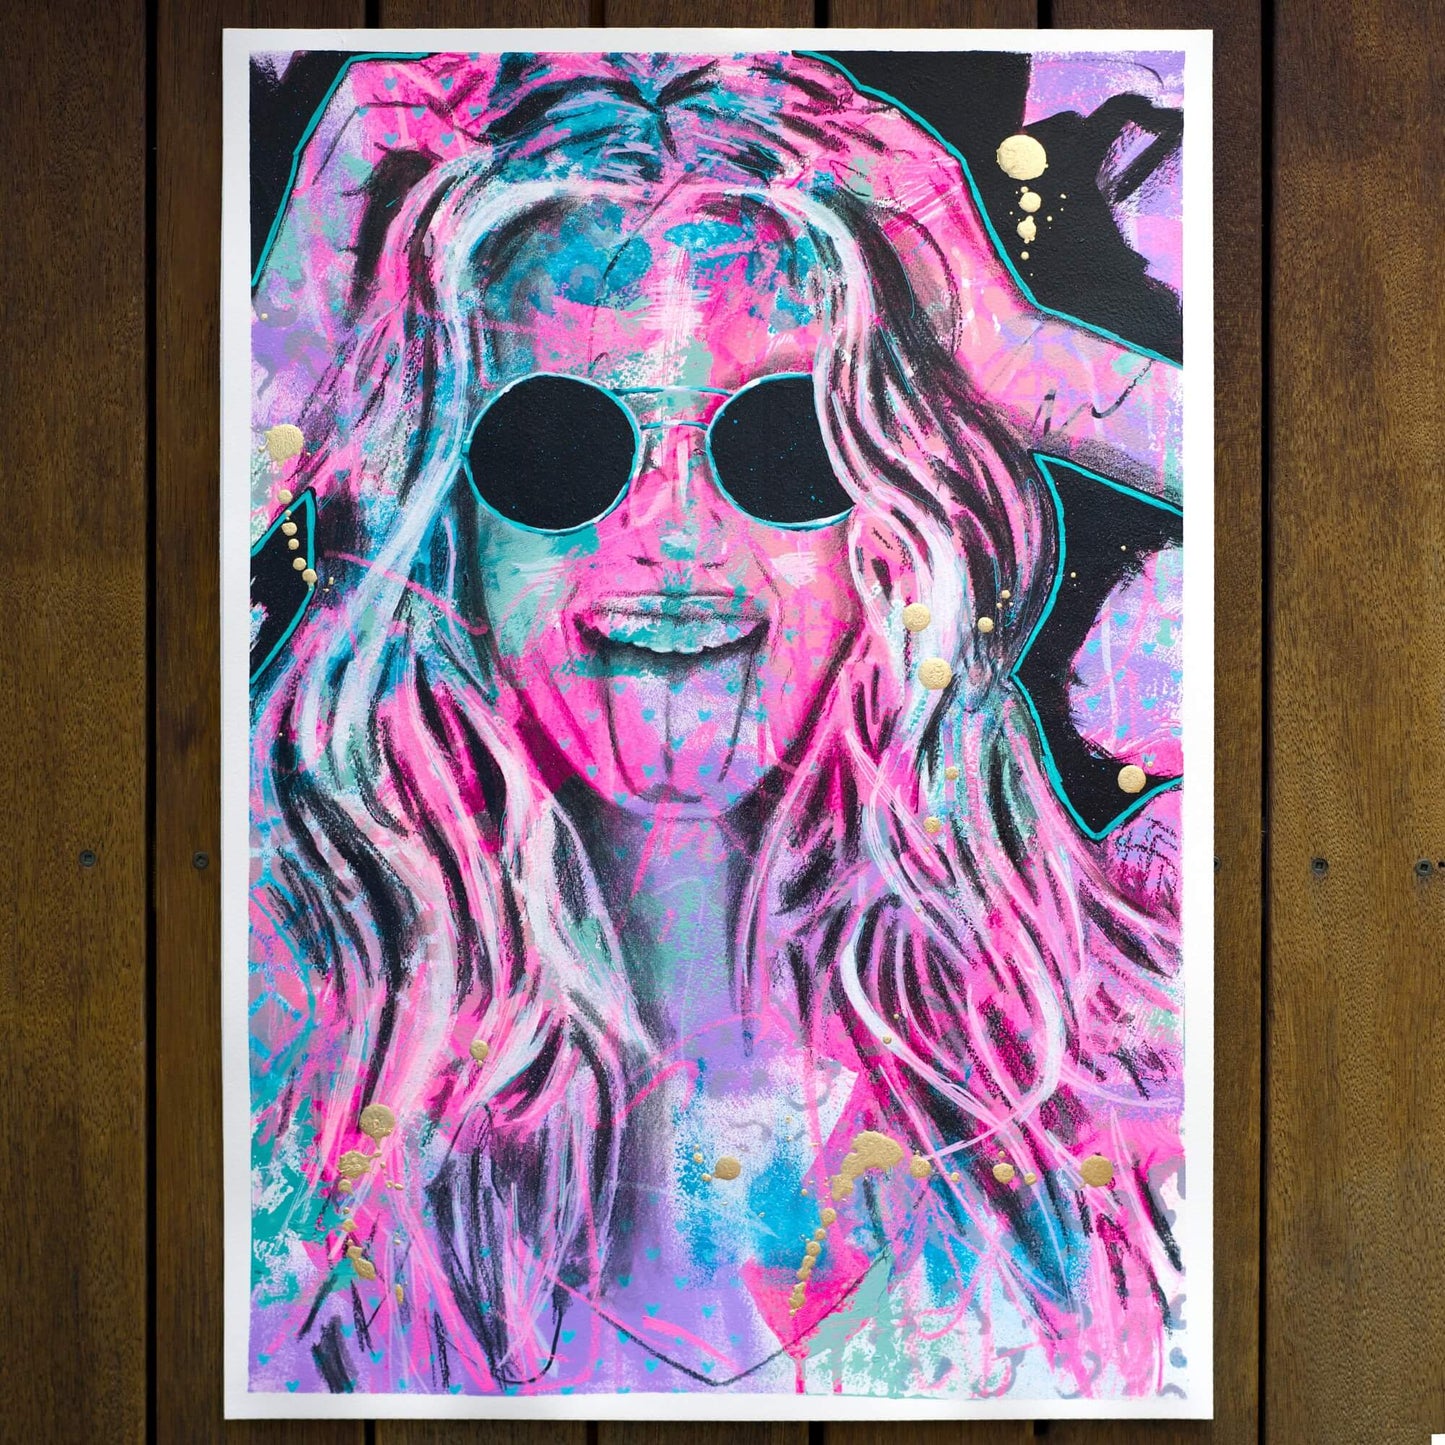 Abstract Art Painting Mixed Media Street Art Made in Melbourne Colourful Pink Woman Sticking her Tongue Out